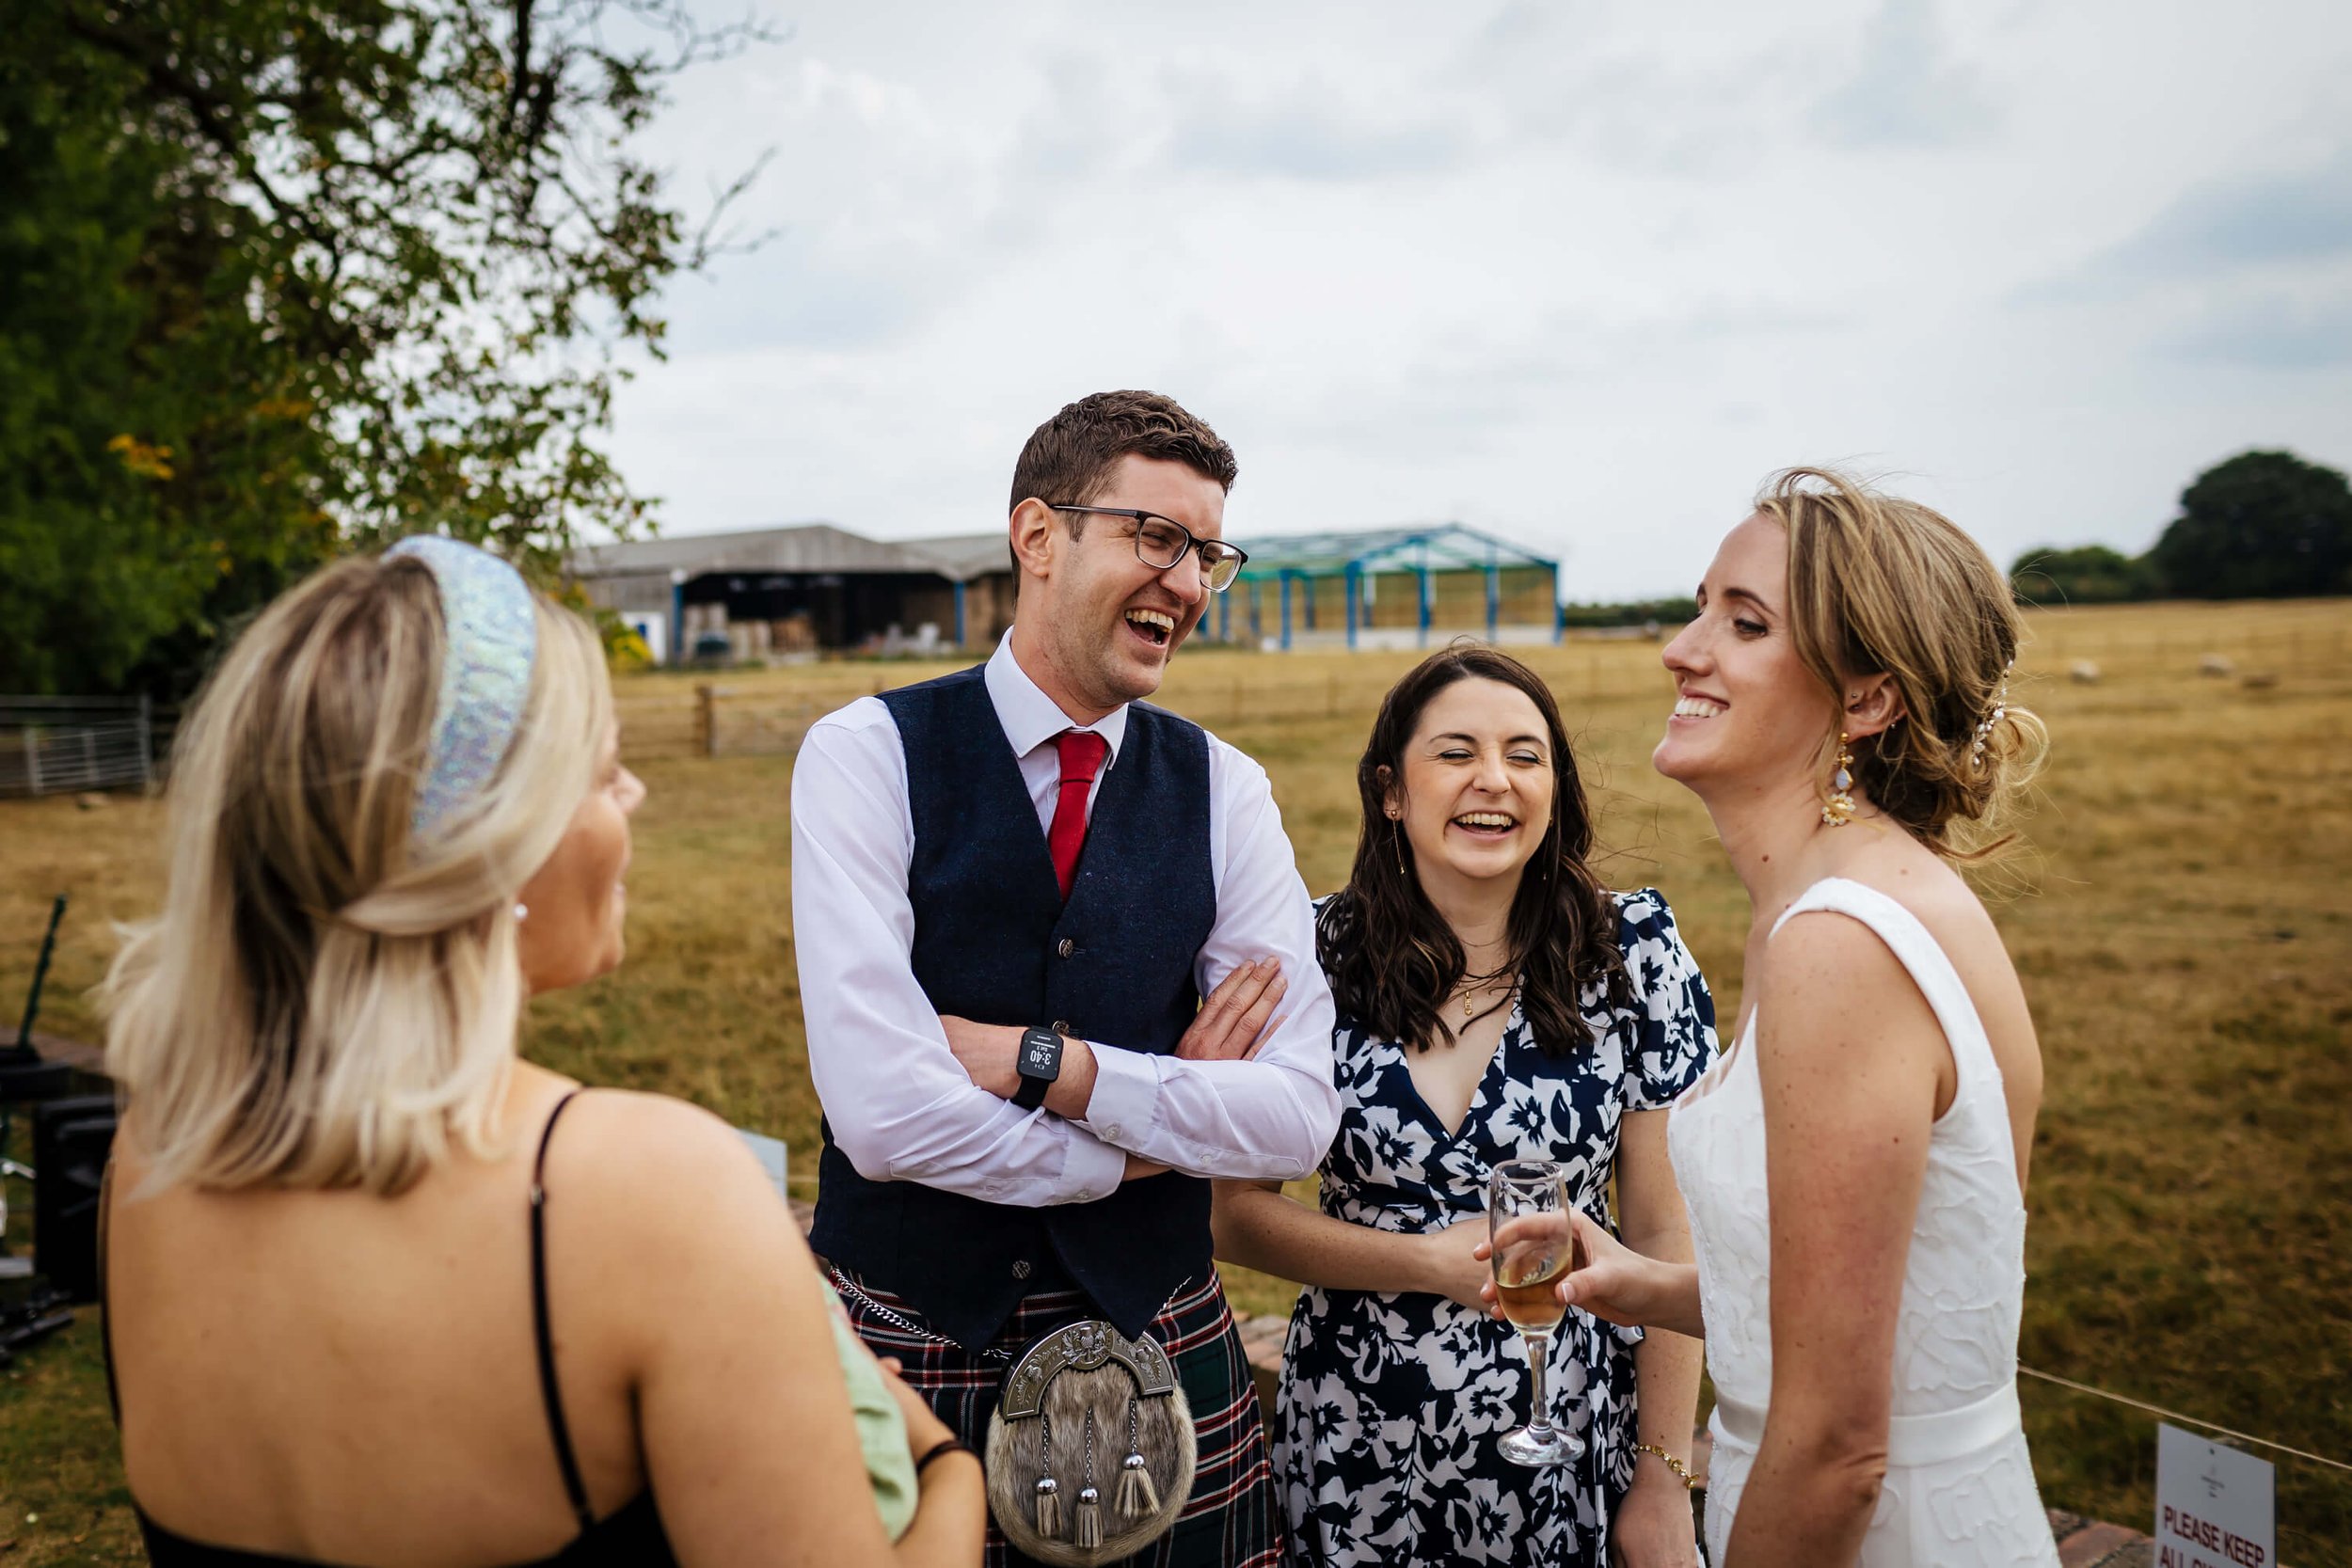 Wedding guests laughing with one another